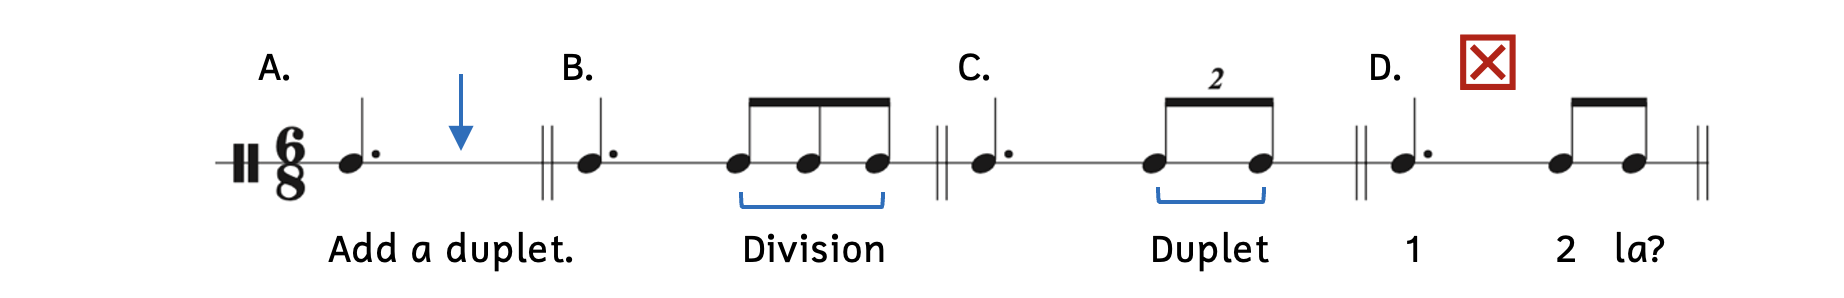 A shows a blank on beat 2 of 6-8. B shows a division of three eighth notes filling the beat. C shows two eighth-note duplets substituting for the three eighth notes. D shows an error when no 2 is written with the duplet.